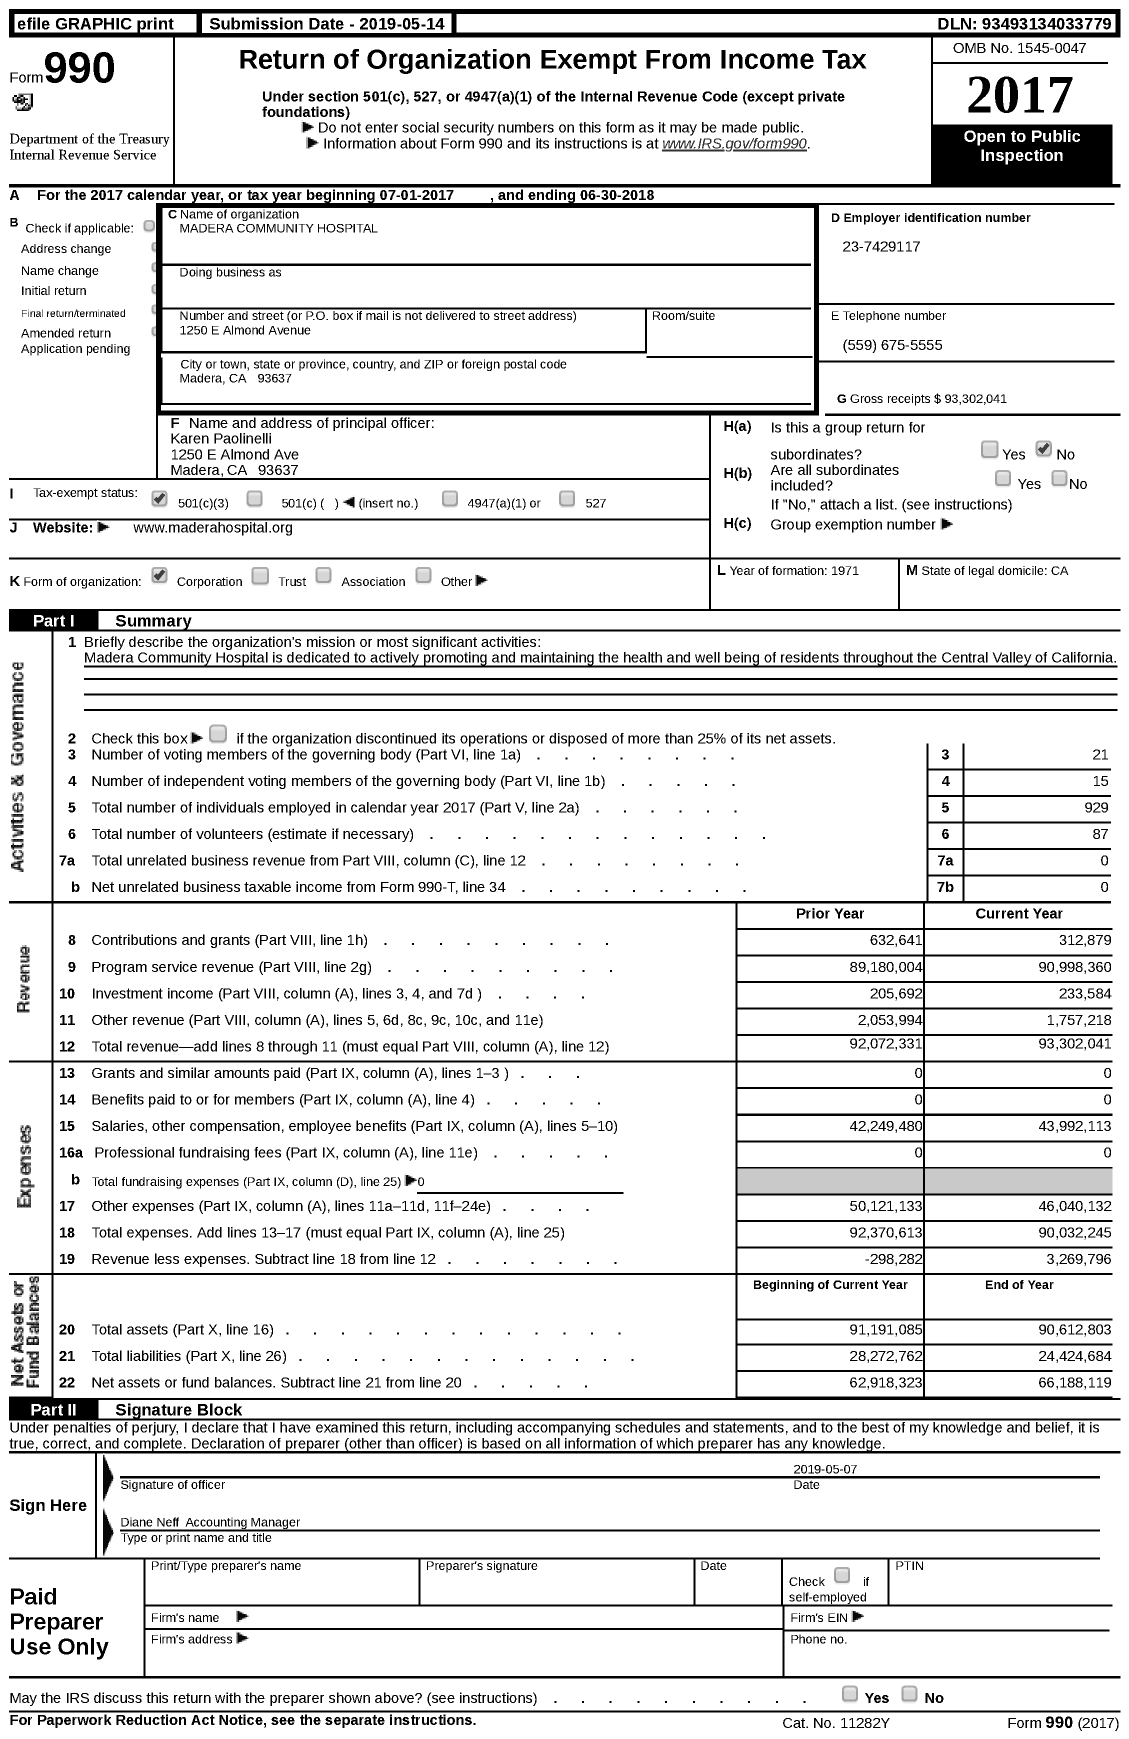 Image of first page of 2017 Form 990 for Madera Community Hospital (MCH)